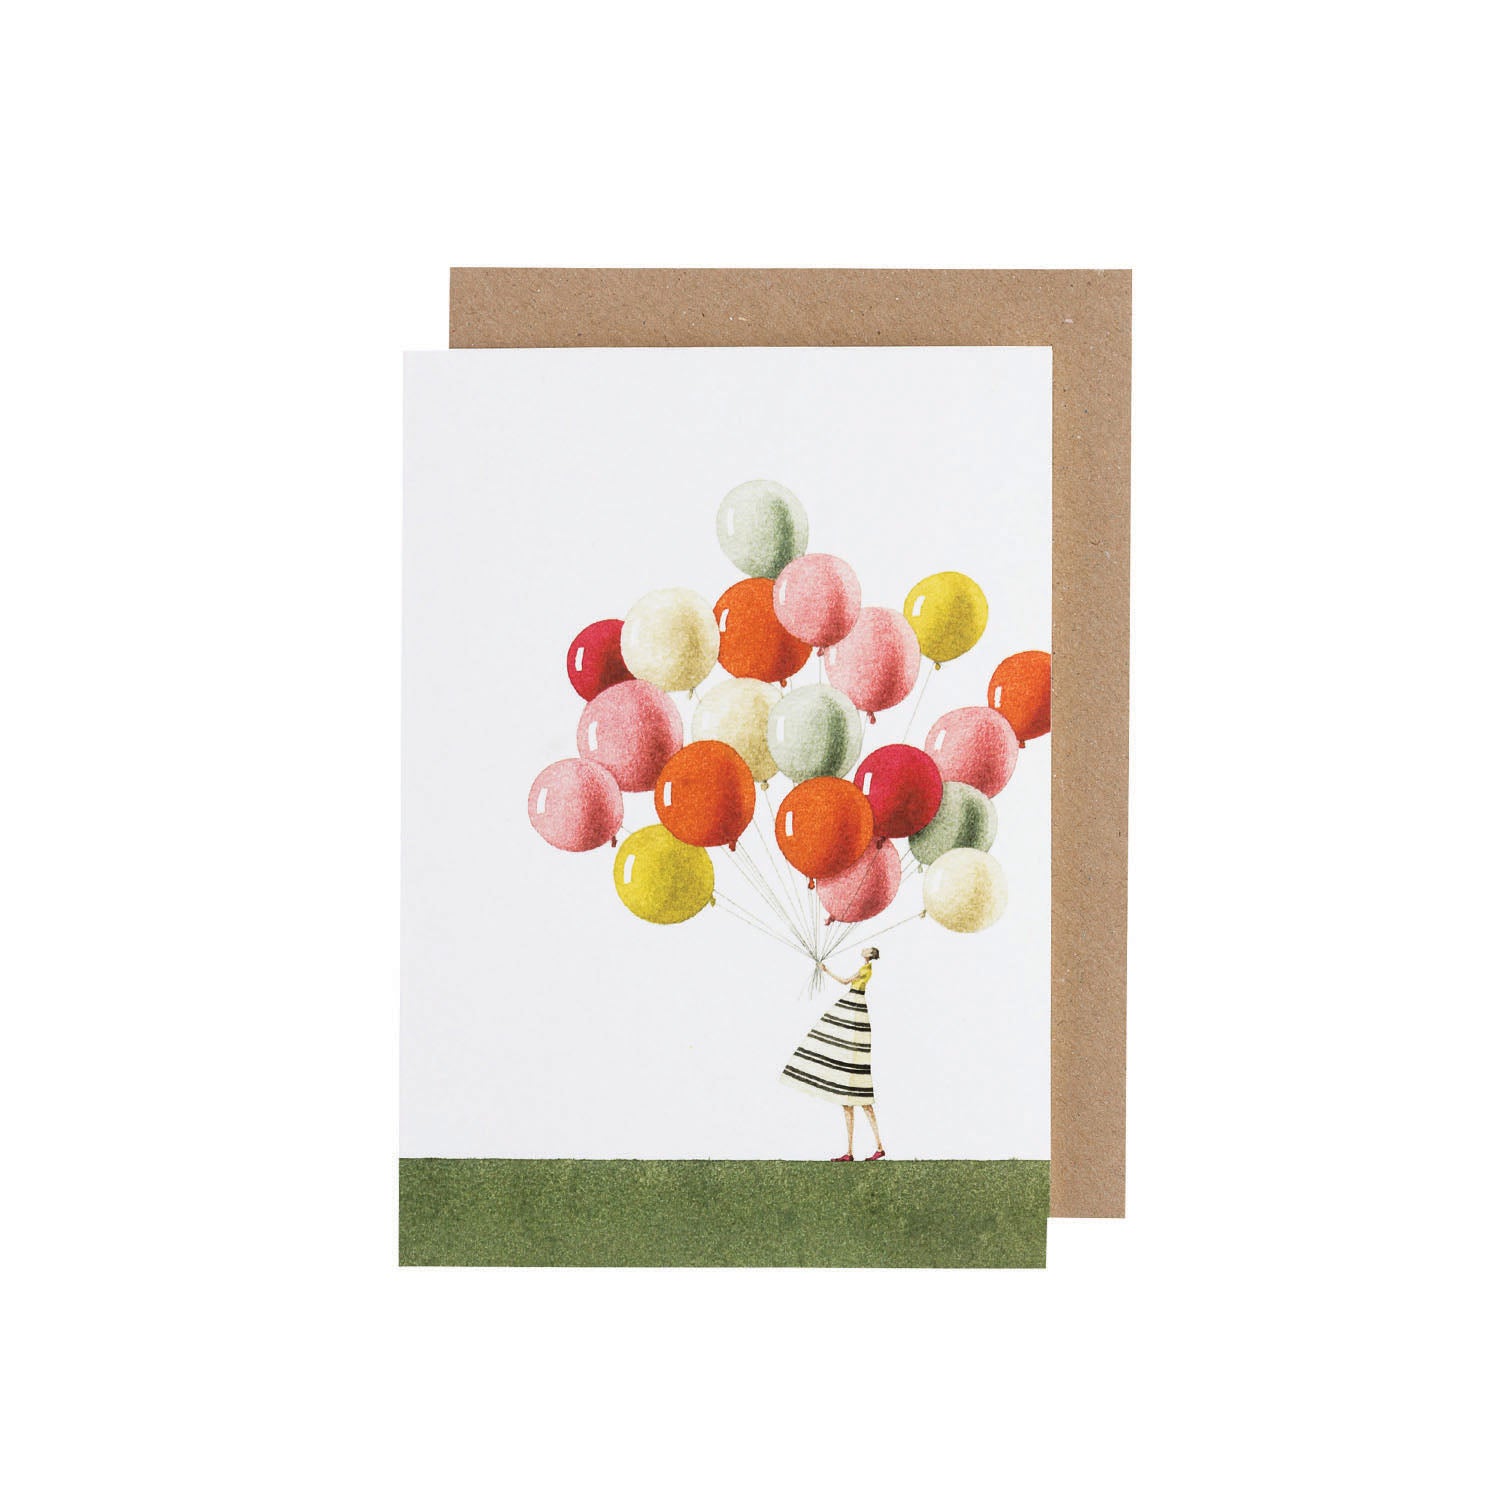 An environmentally sustainable Hester &amp; Cook Balloons Card, Set of 10, featuring a girl in a striped dress holding a bunch of colorful balloons.